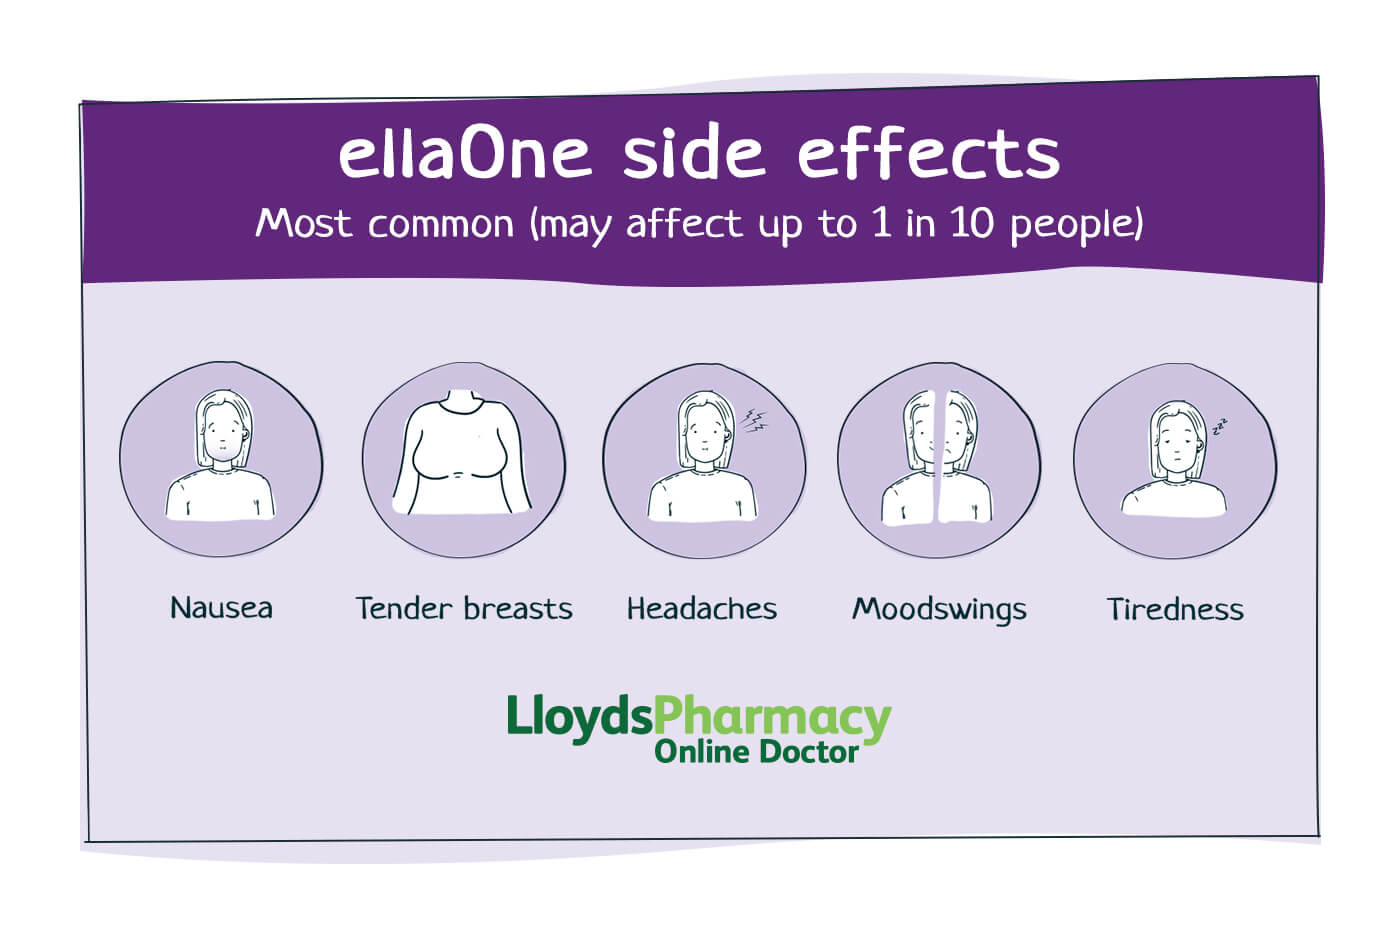 Common side effects of ellaOne